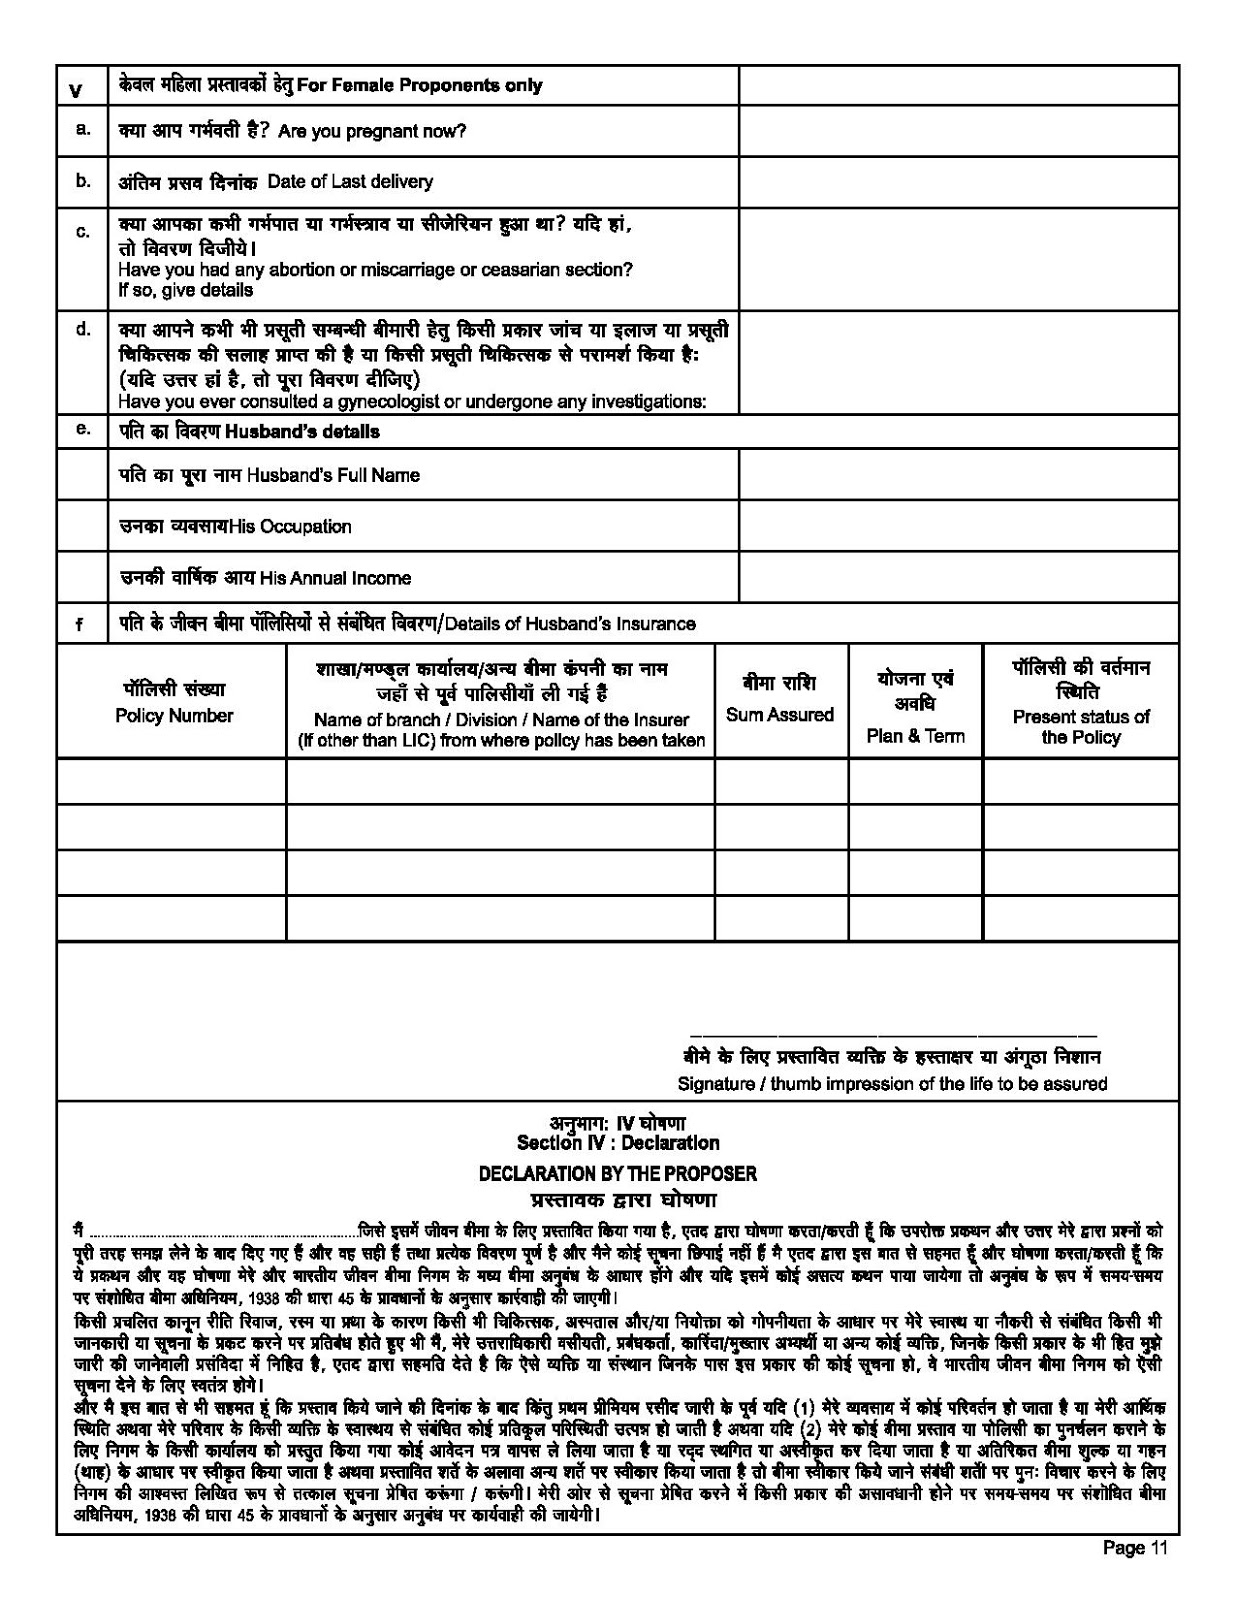 lic policy assignment form 3848